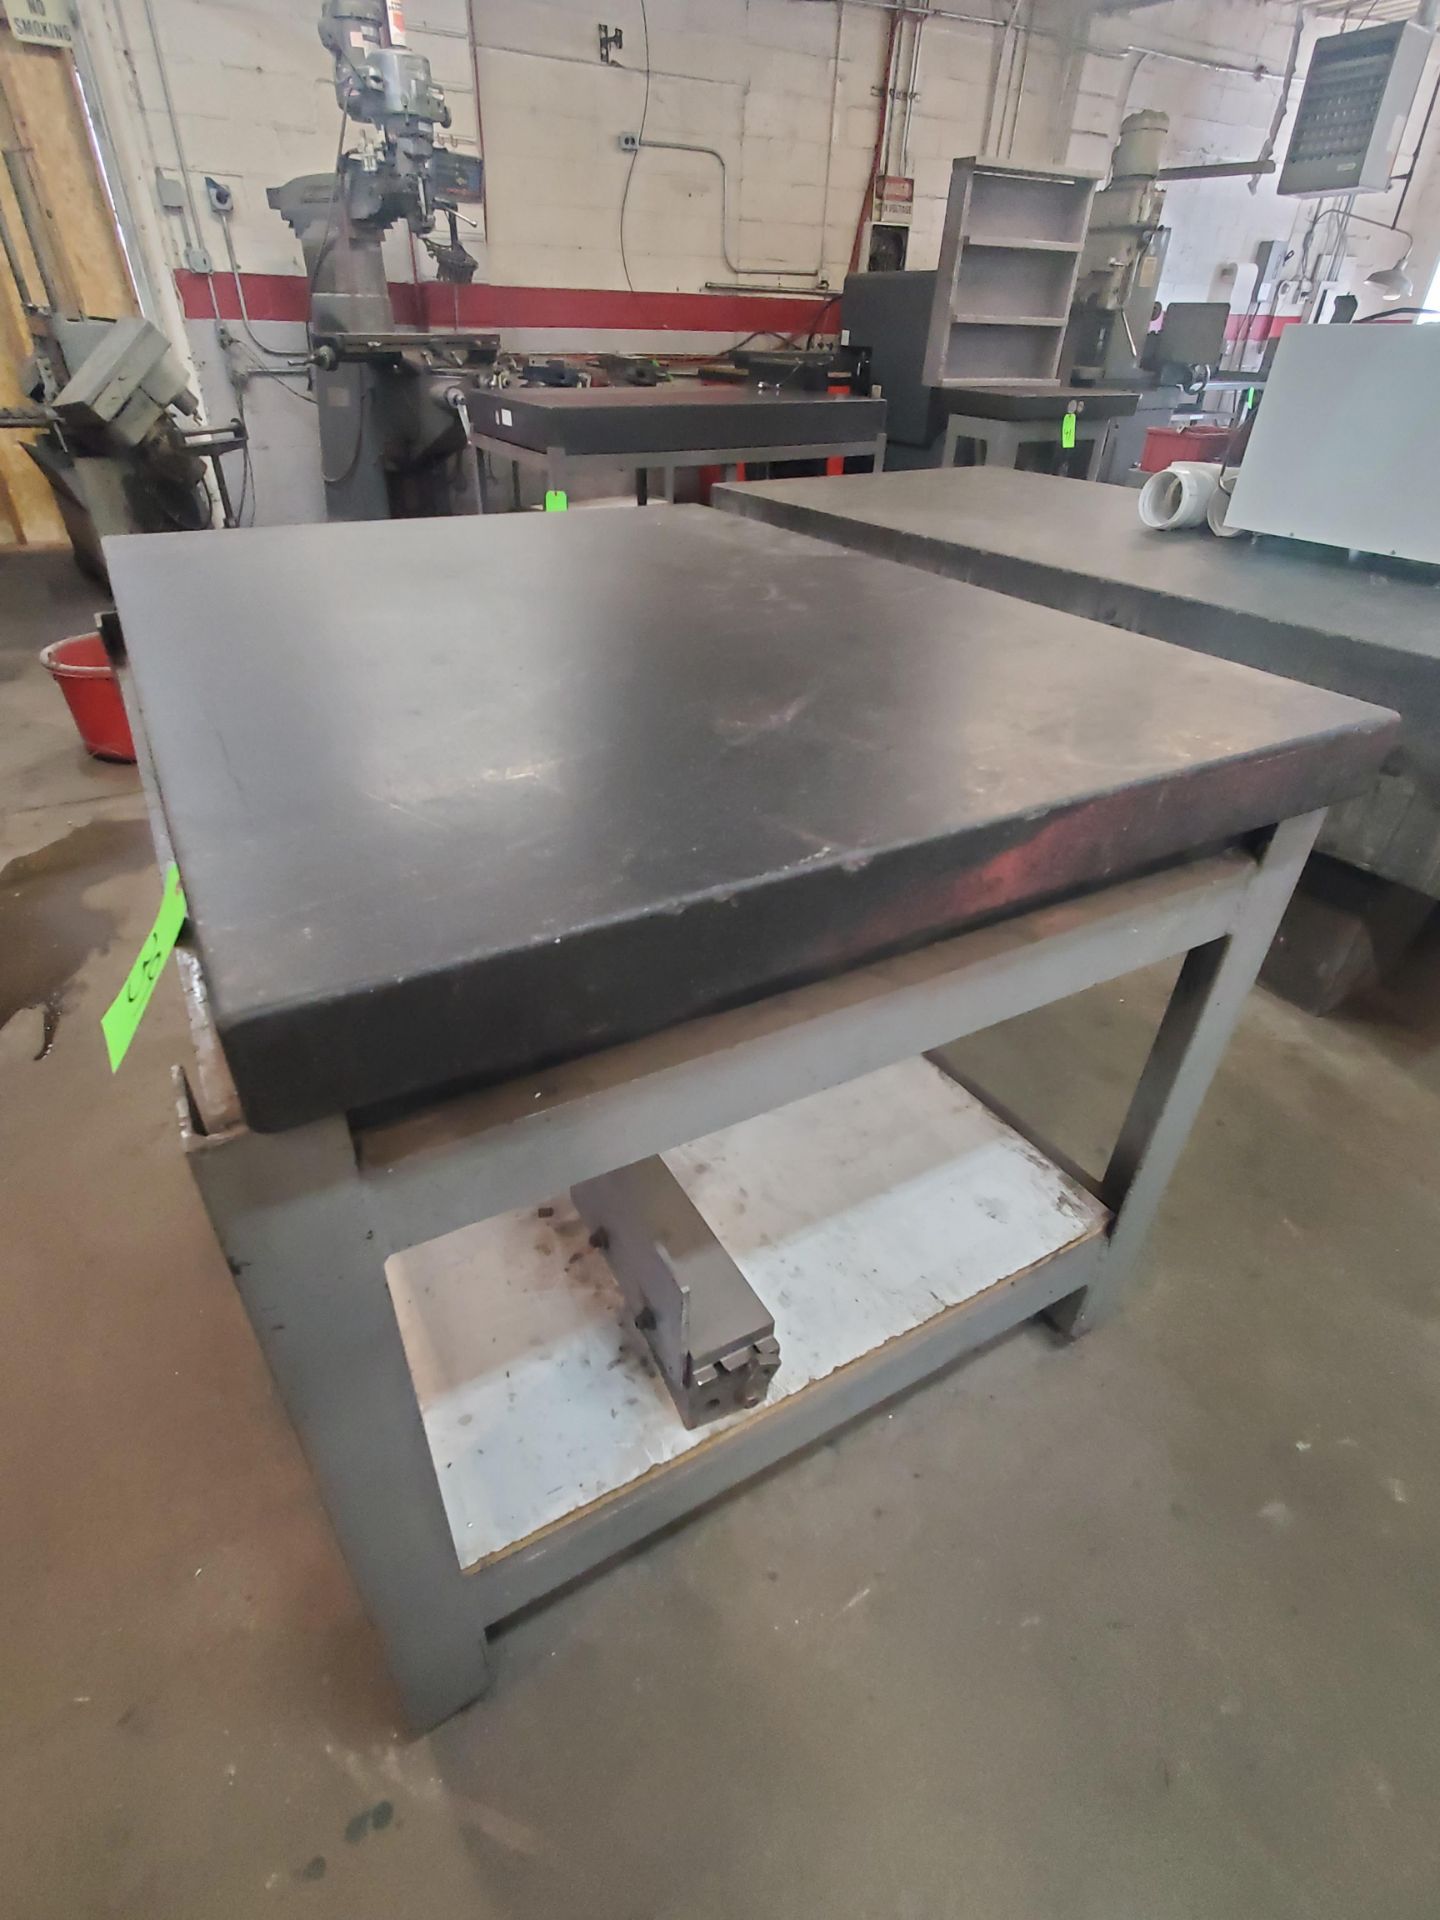 Granite Table w/ Stand, 48" x 36" x 6" - Image 2 of 3